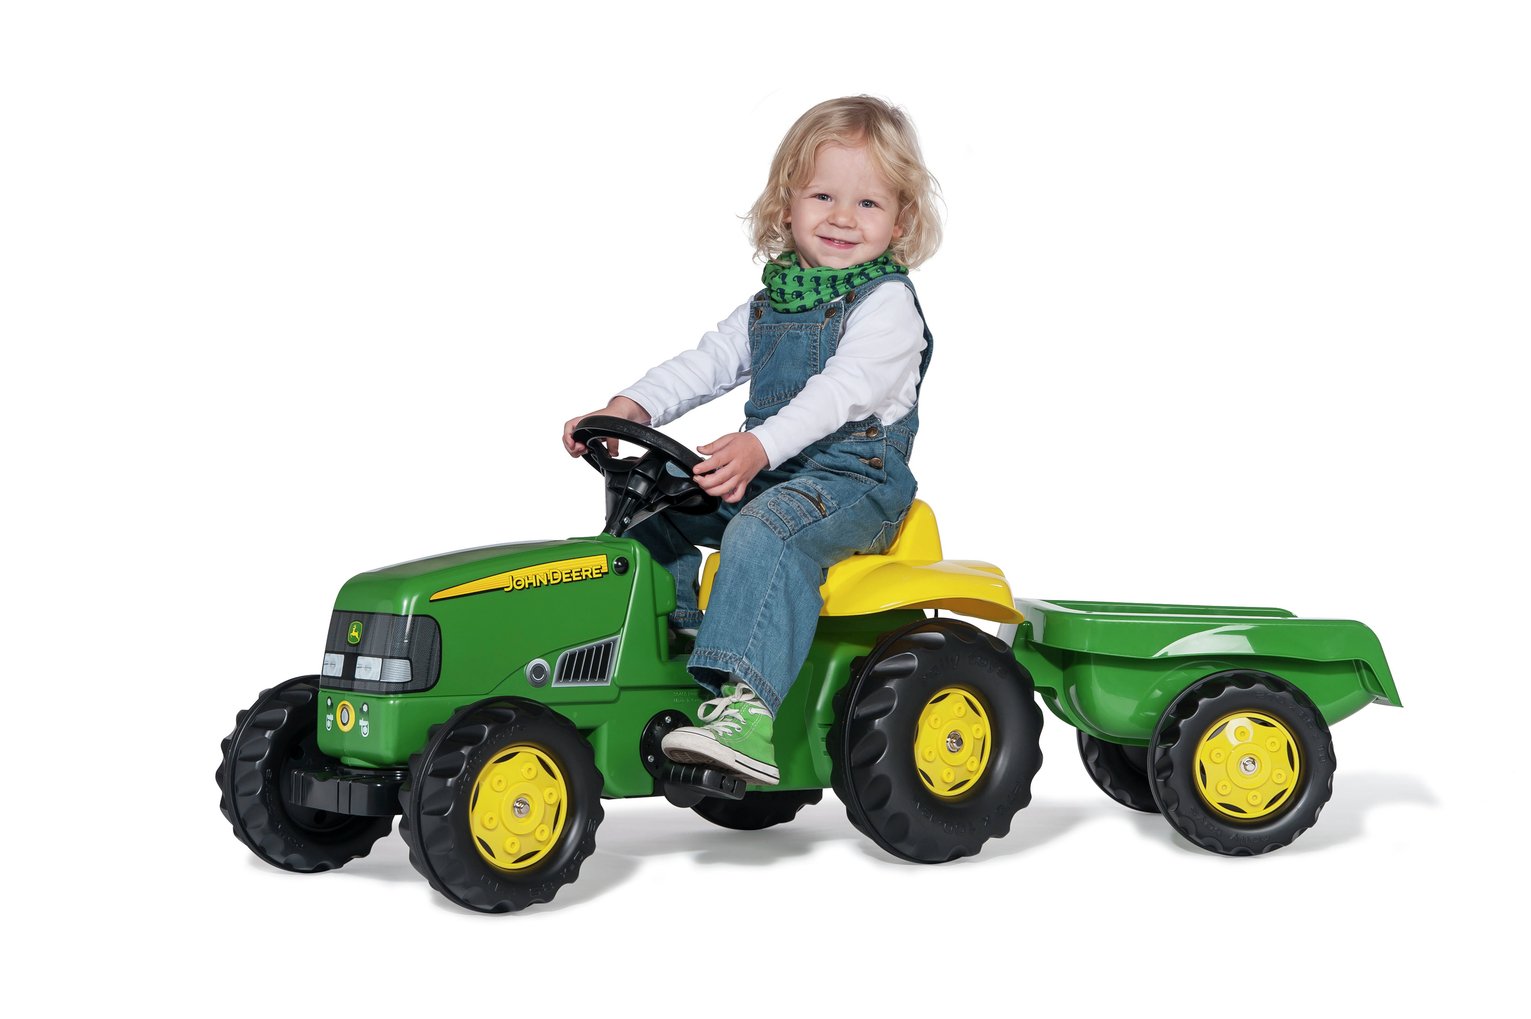 John Deere Tractor and Trailer review